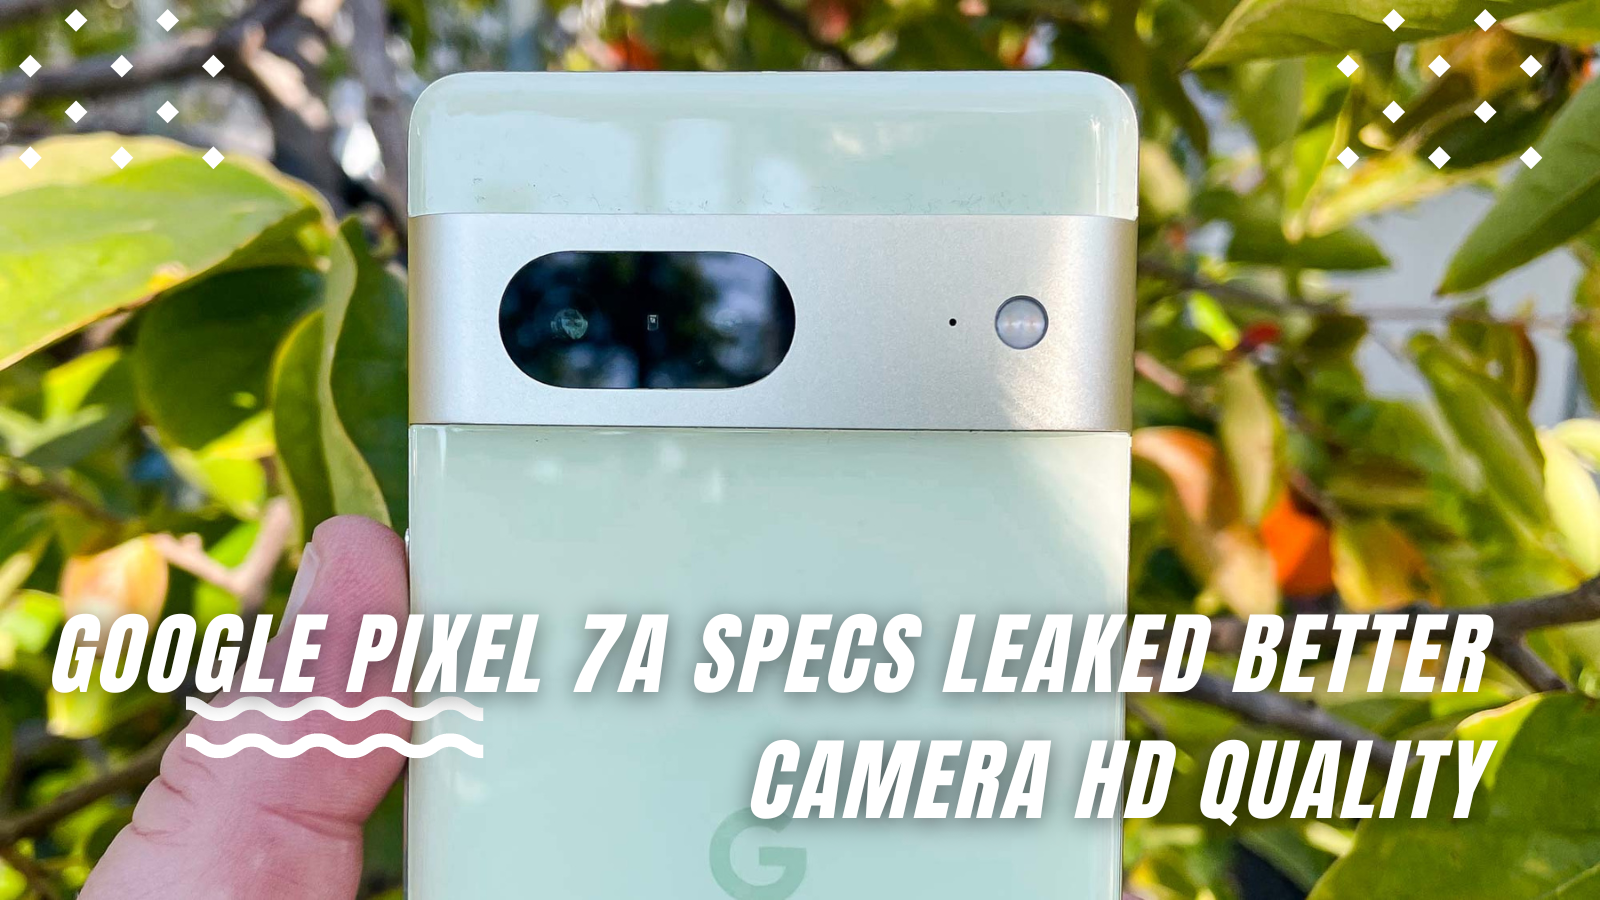 Google Pixel 7a Specs Leaked Better Camera Hd Quality, New Colors, and More